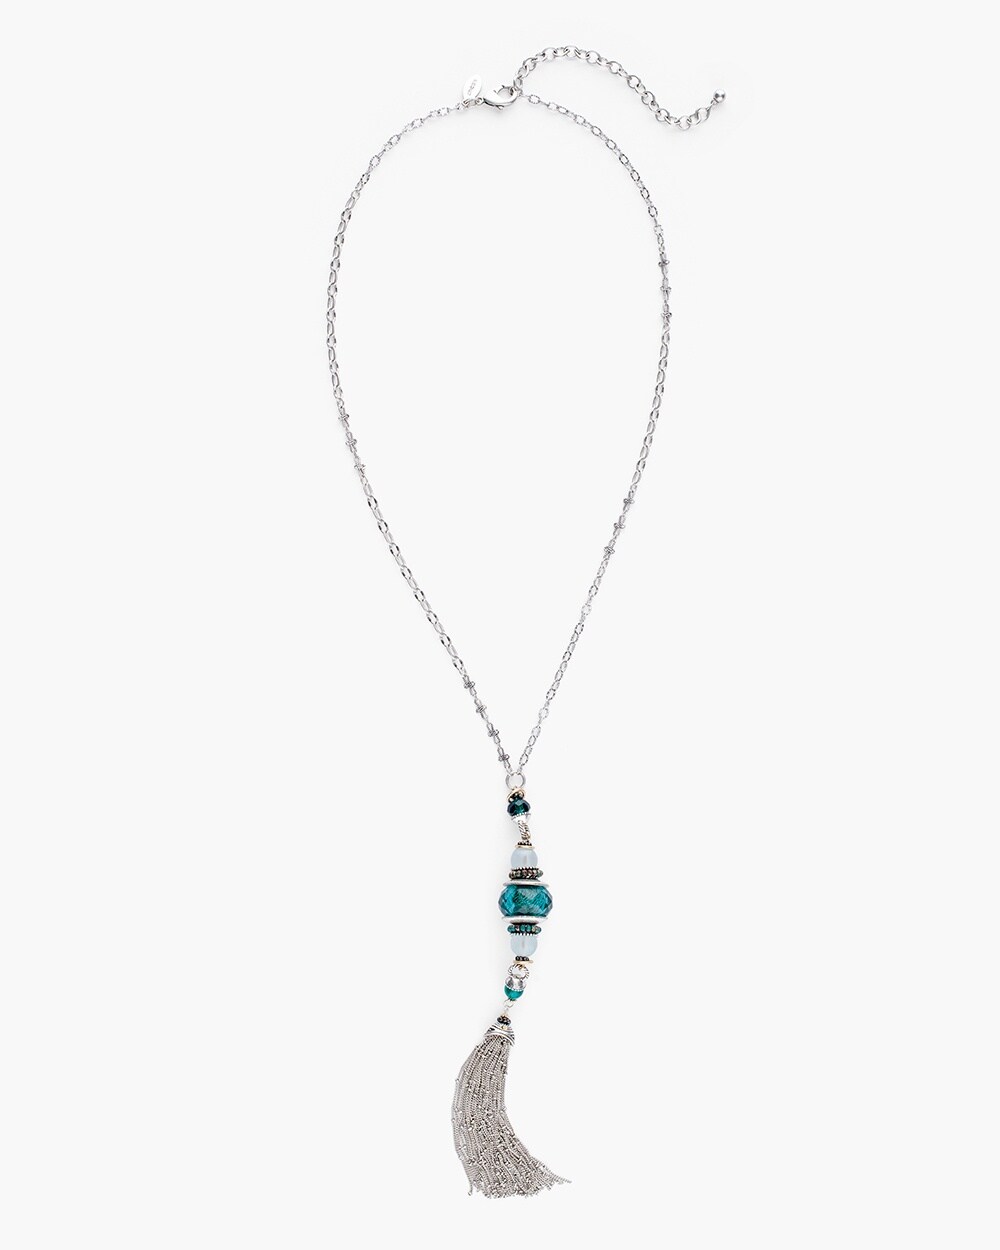 Teal Stone Tassel Necklace